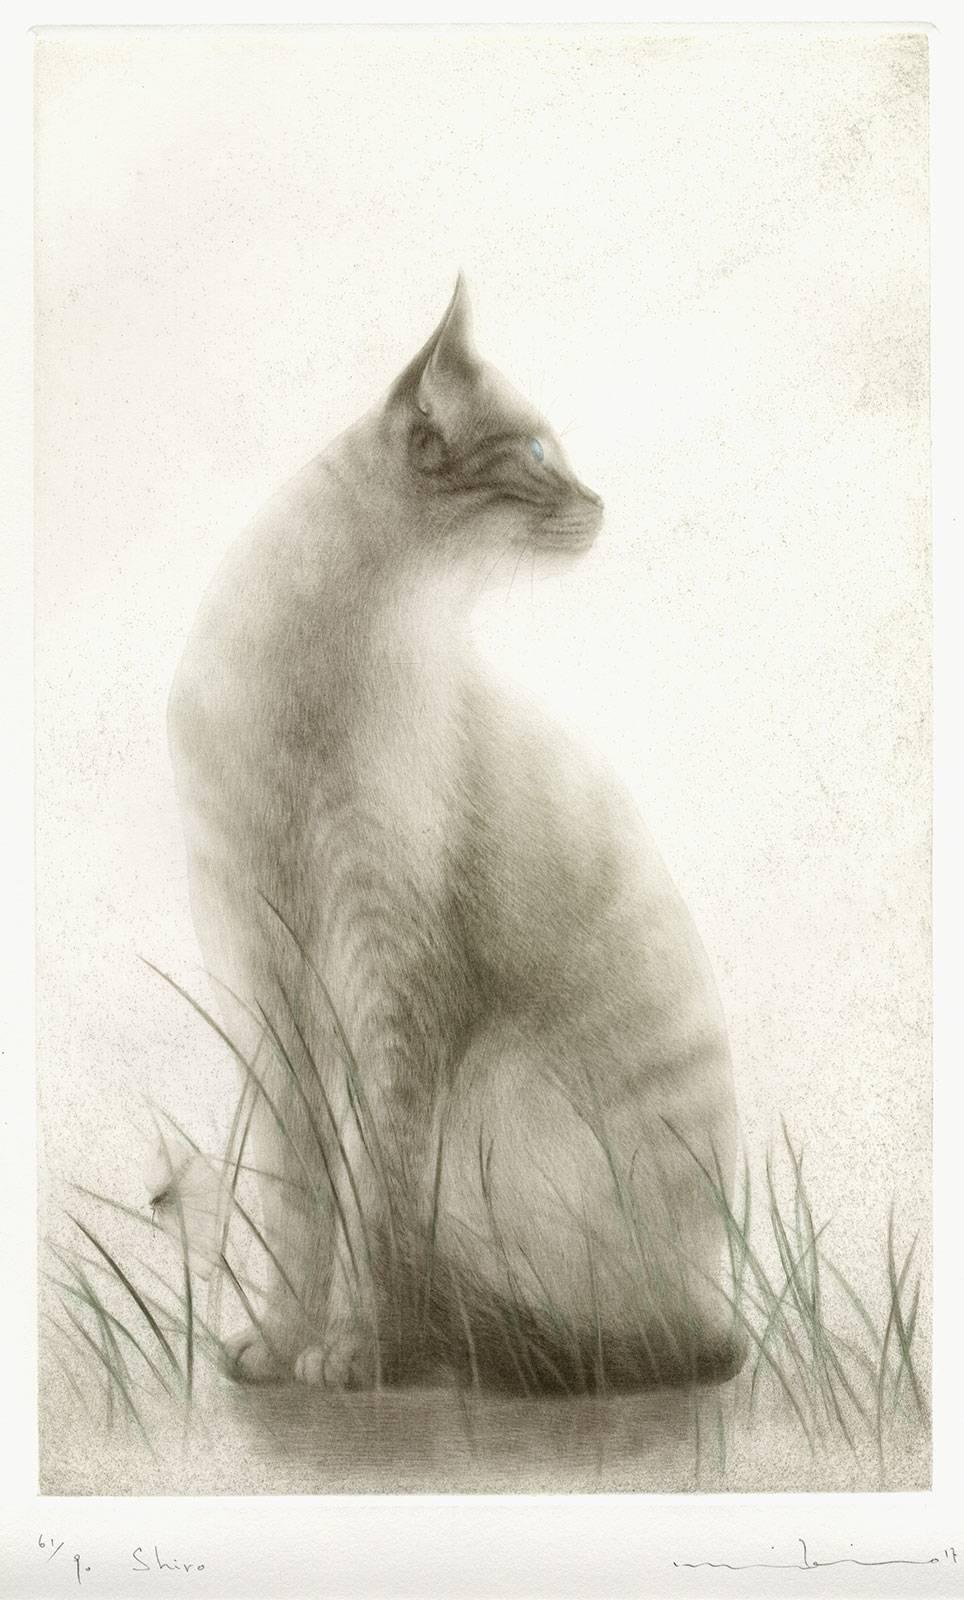 Mikio Watanabe Animal Print - Shiro (portrait of an elegant, alert cat sitting in a meadow with flying insect)